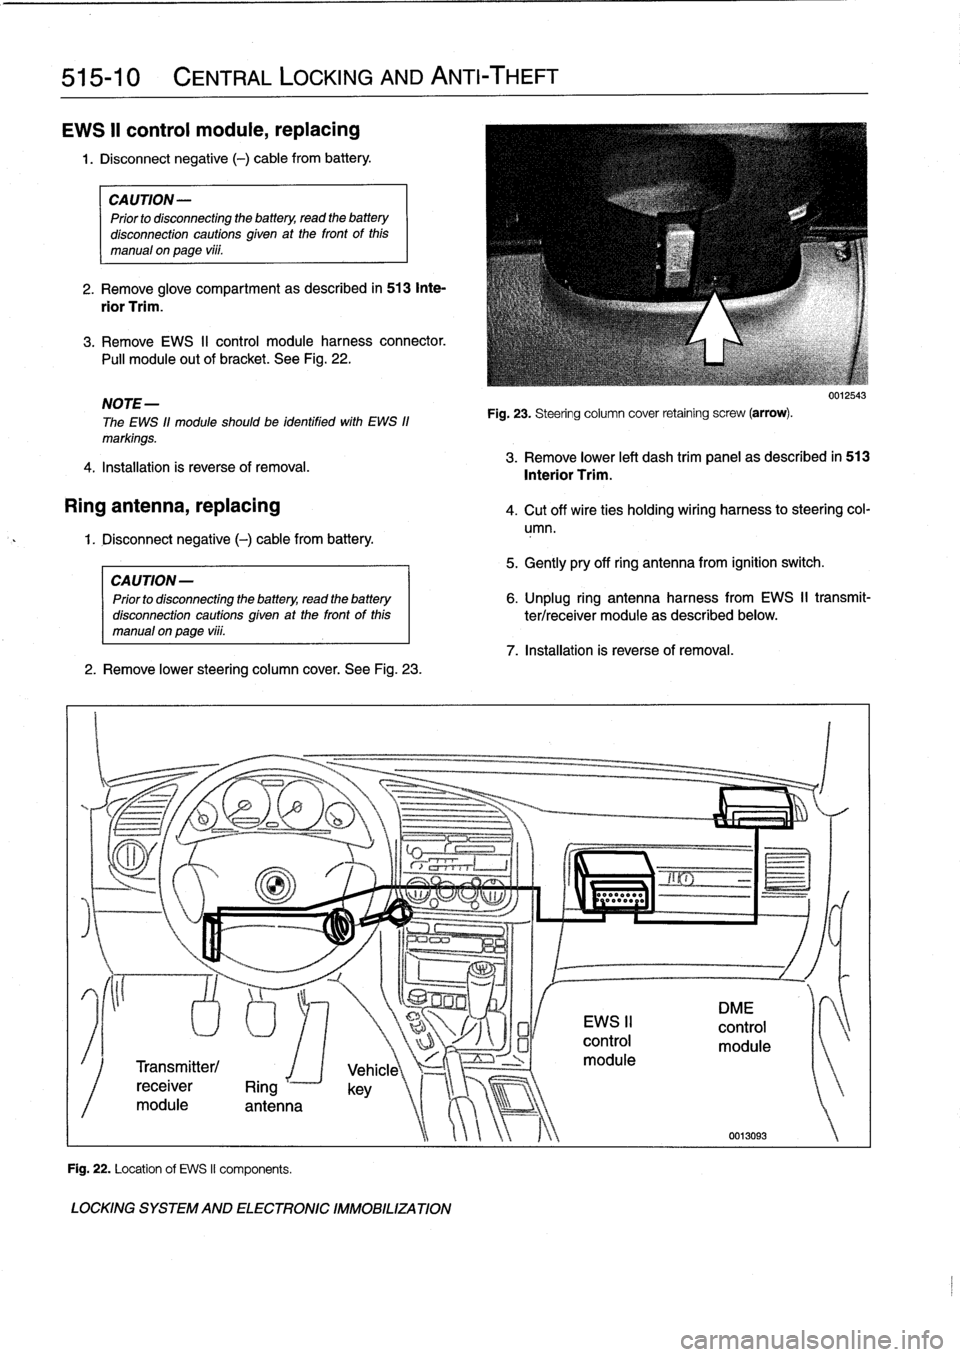 BMW 328i 1994 E36 Workshop Manual 
515-10

	

CENTRAL
LOCKING
AND
ANTI-THEFT

EWS
II
control
module,
replacing

1
.
Disconnect
negative
(-)
cable
from
battery
.

CAUTION-

Prior
to
disconnecting
the
battery,
read
the
battery

disconne